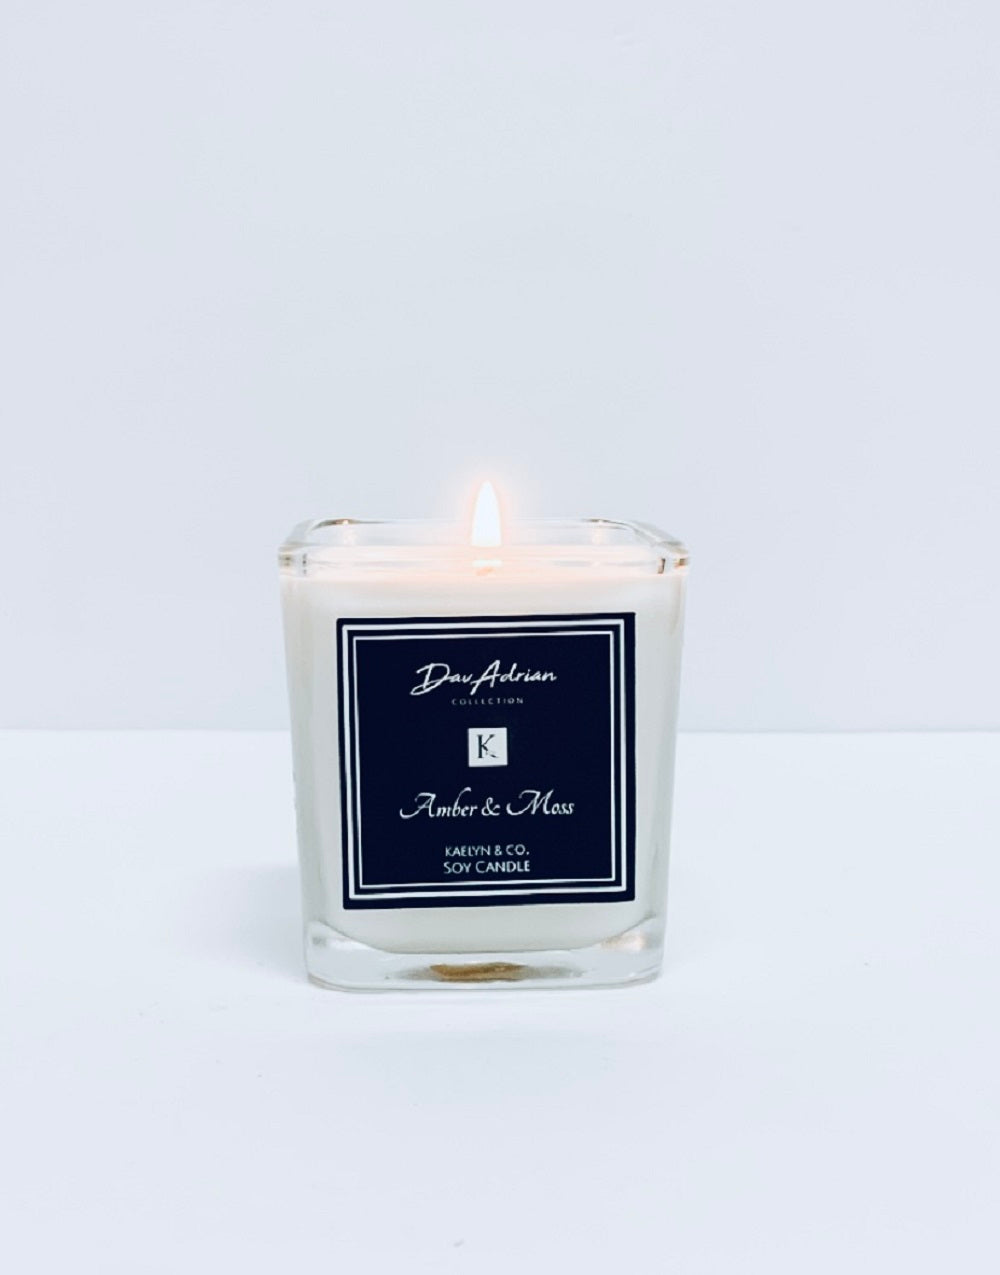 DavAdrian Collection Amber & Moss Small Cube Candle - Kaelyn & Co.